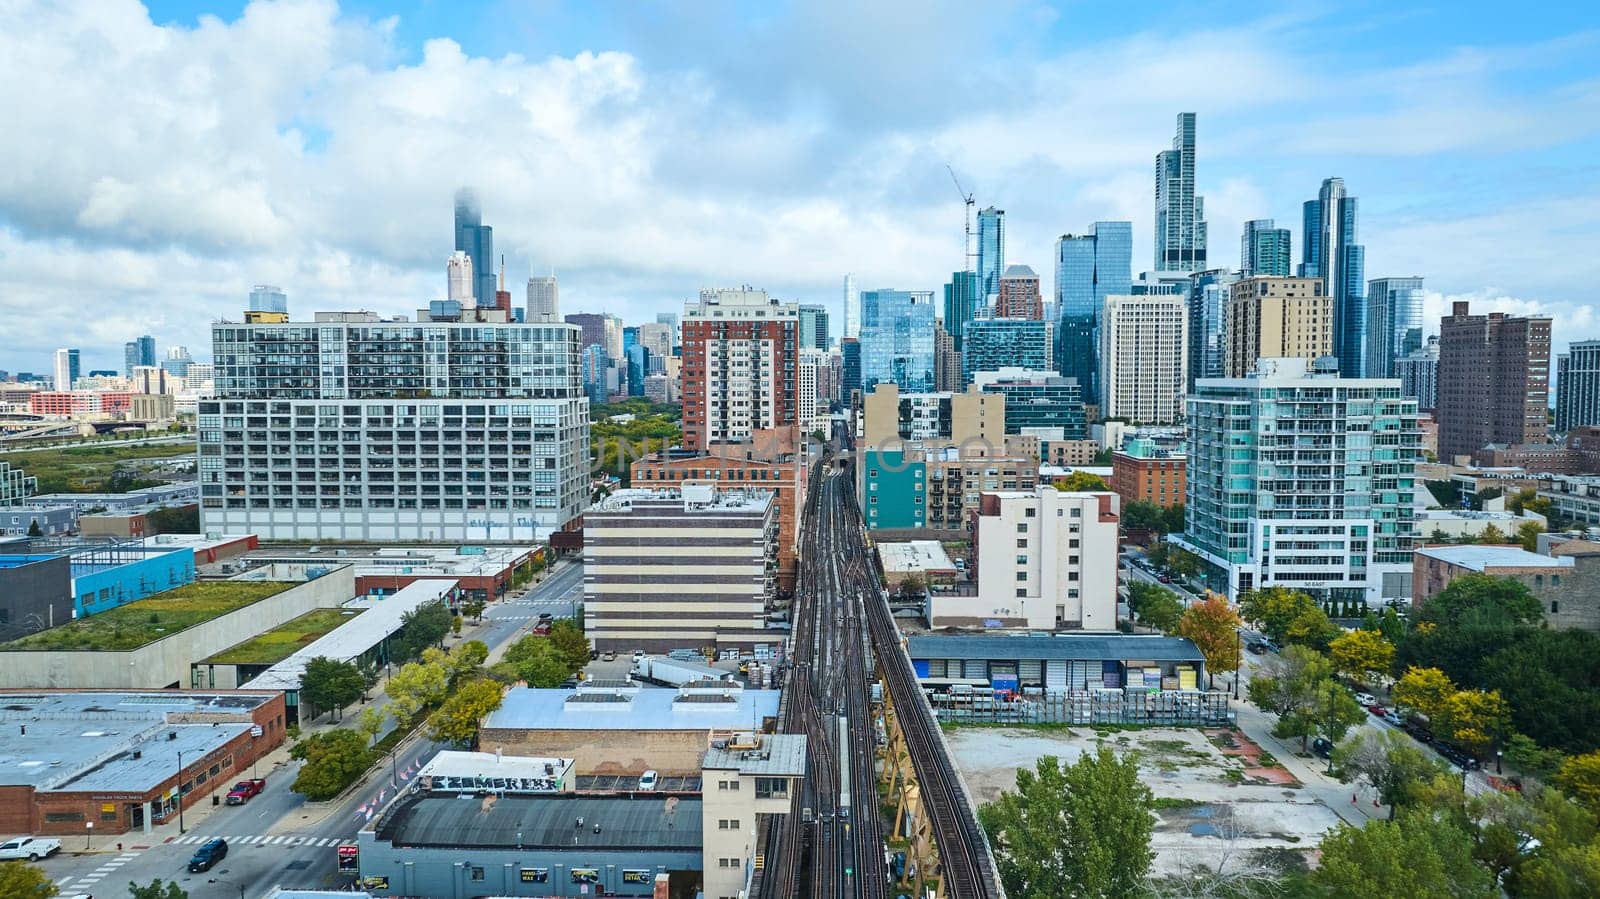 Aerial with railroad tracks leading into skyscraper buildings in downtown Chicago, IL by njproductions